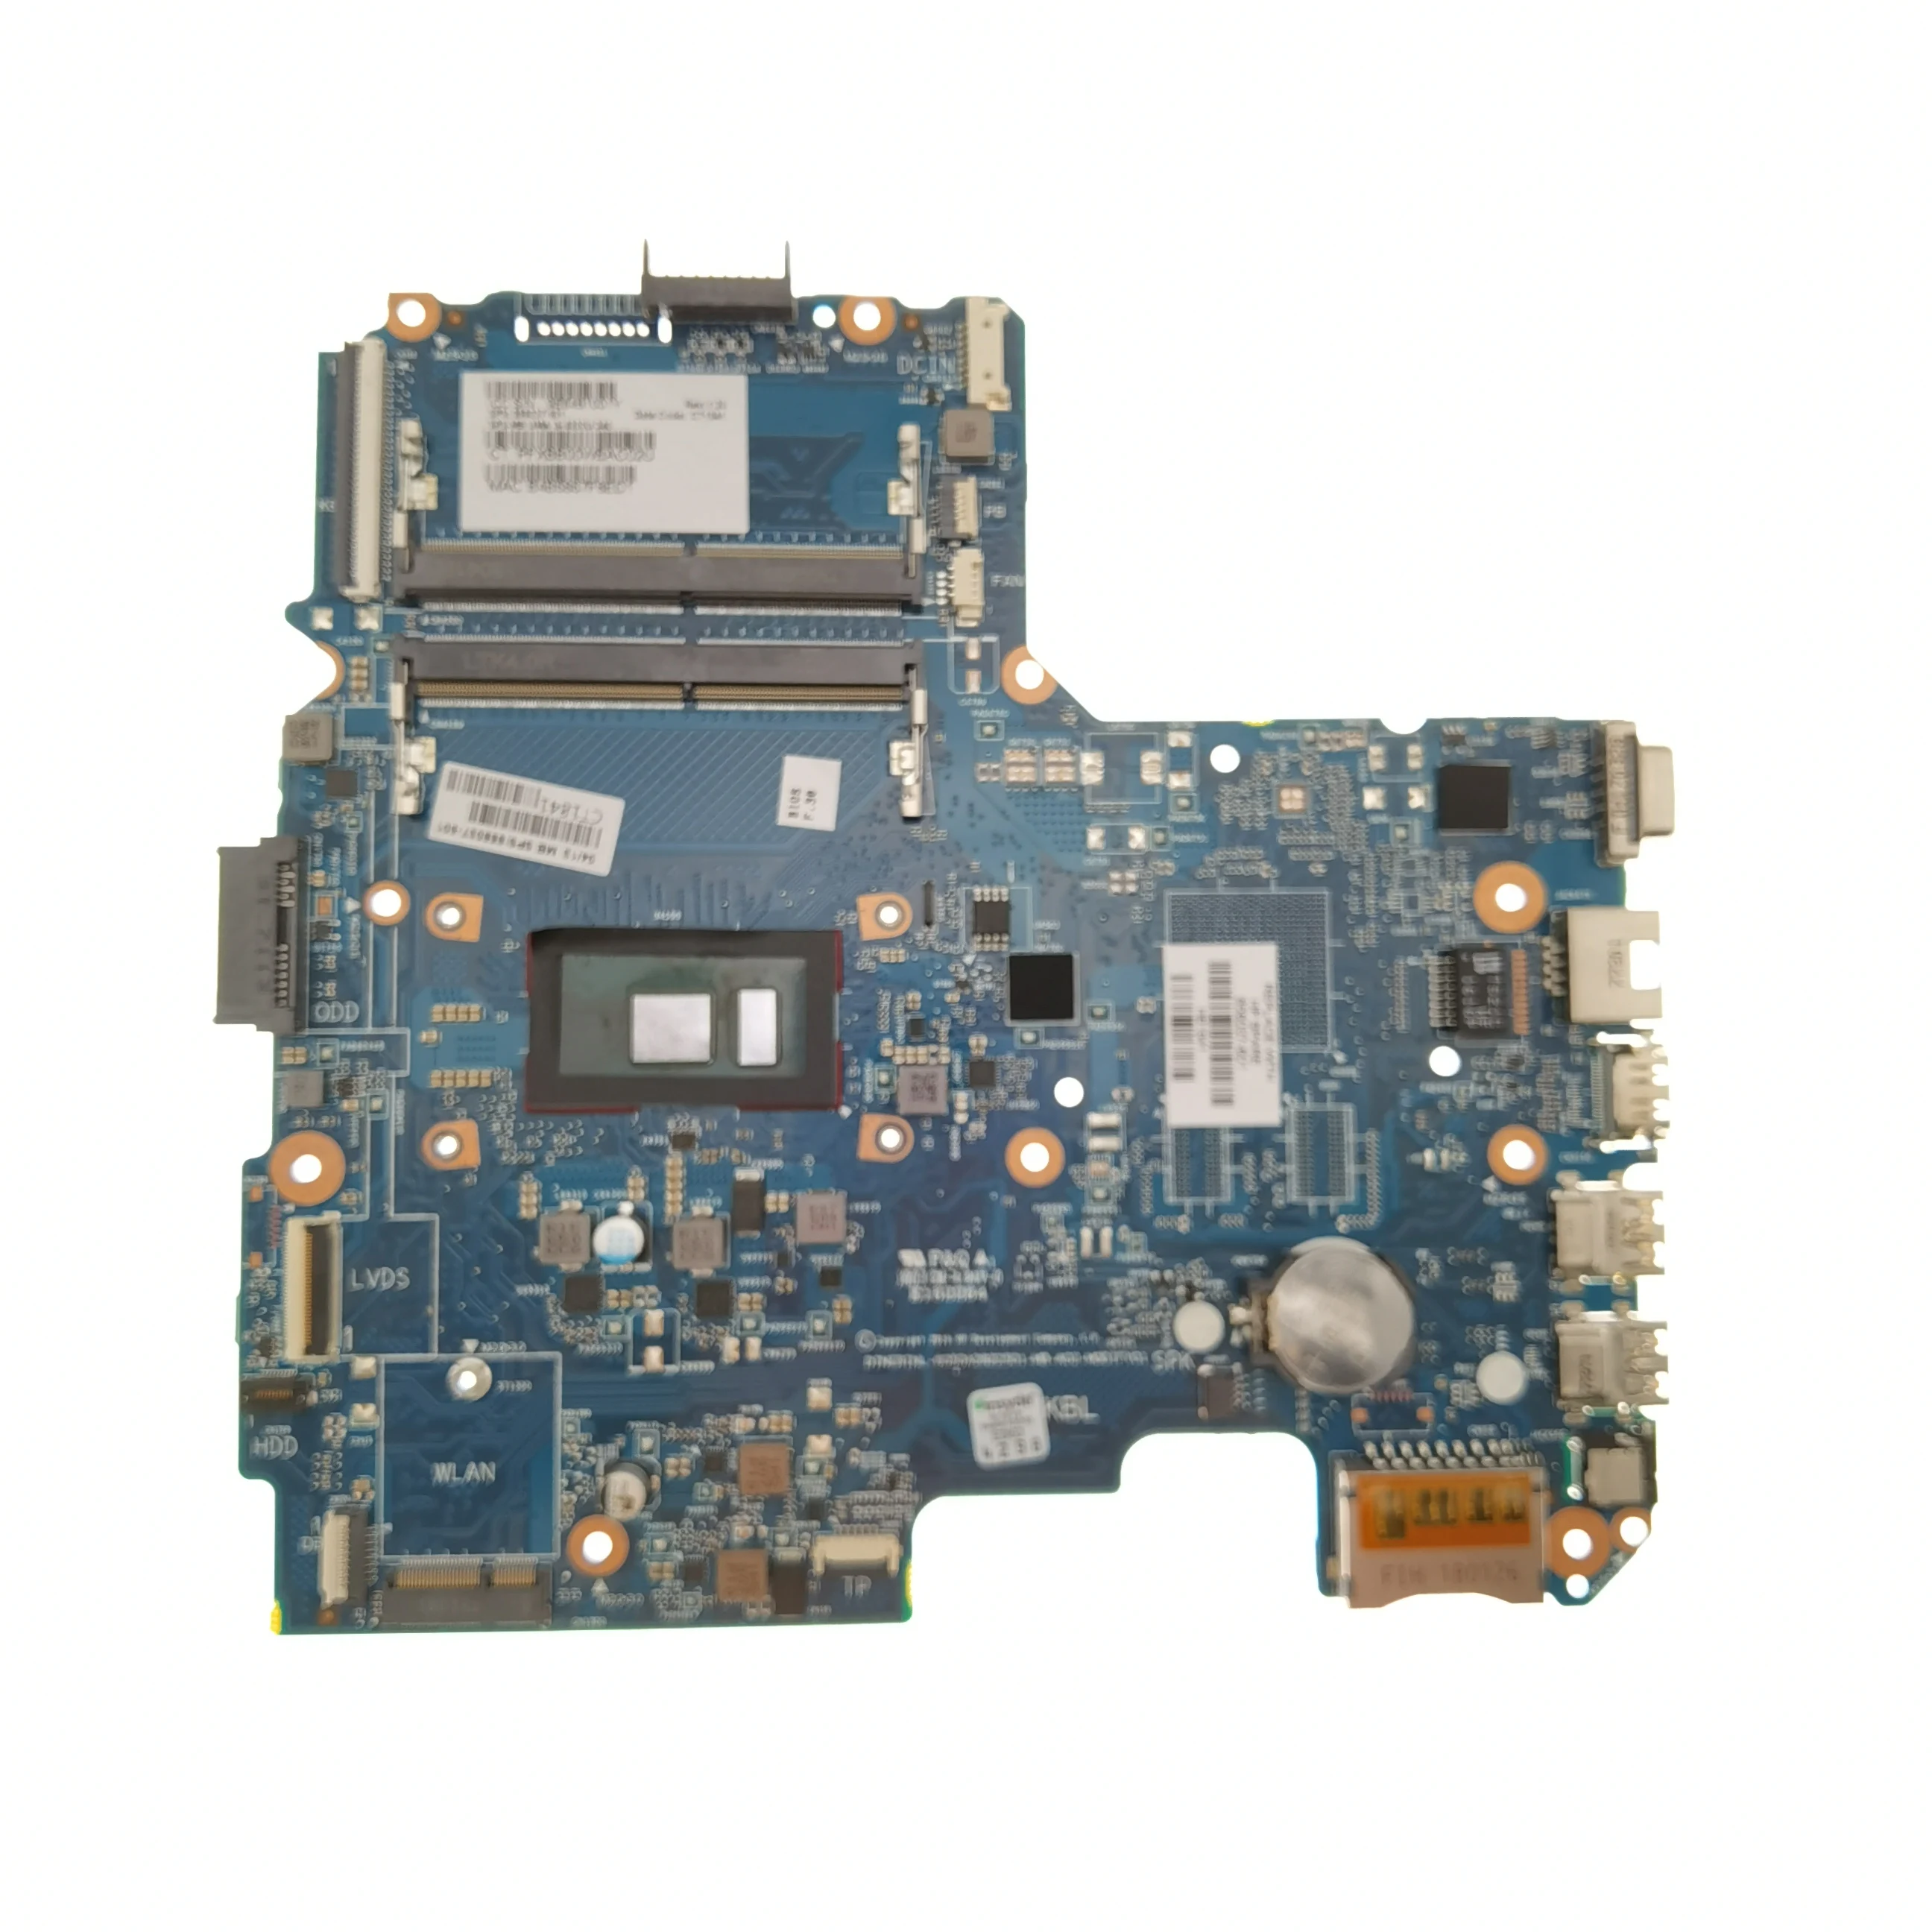 6050A2822501 motherboard for HP Pavillion 240 G4 14-AC 14-AM 15-AM  Laptop motherboard with I3 I5 I7 CPU DDR4 100% Test work